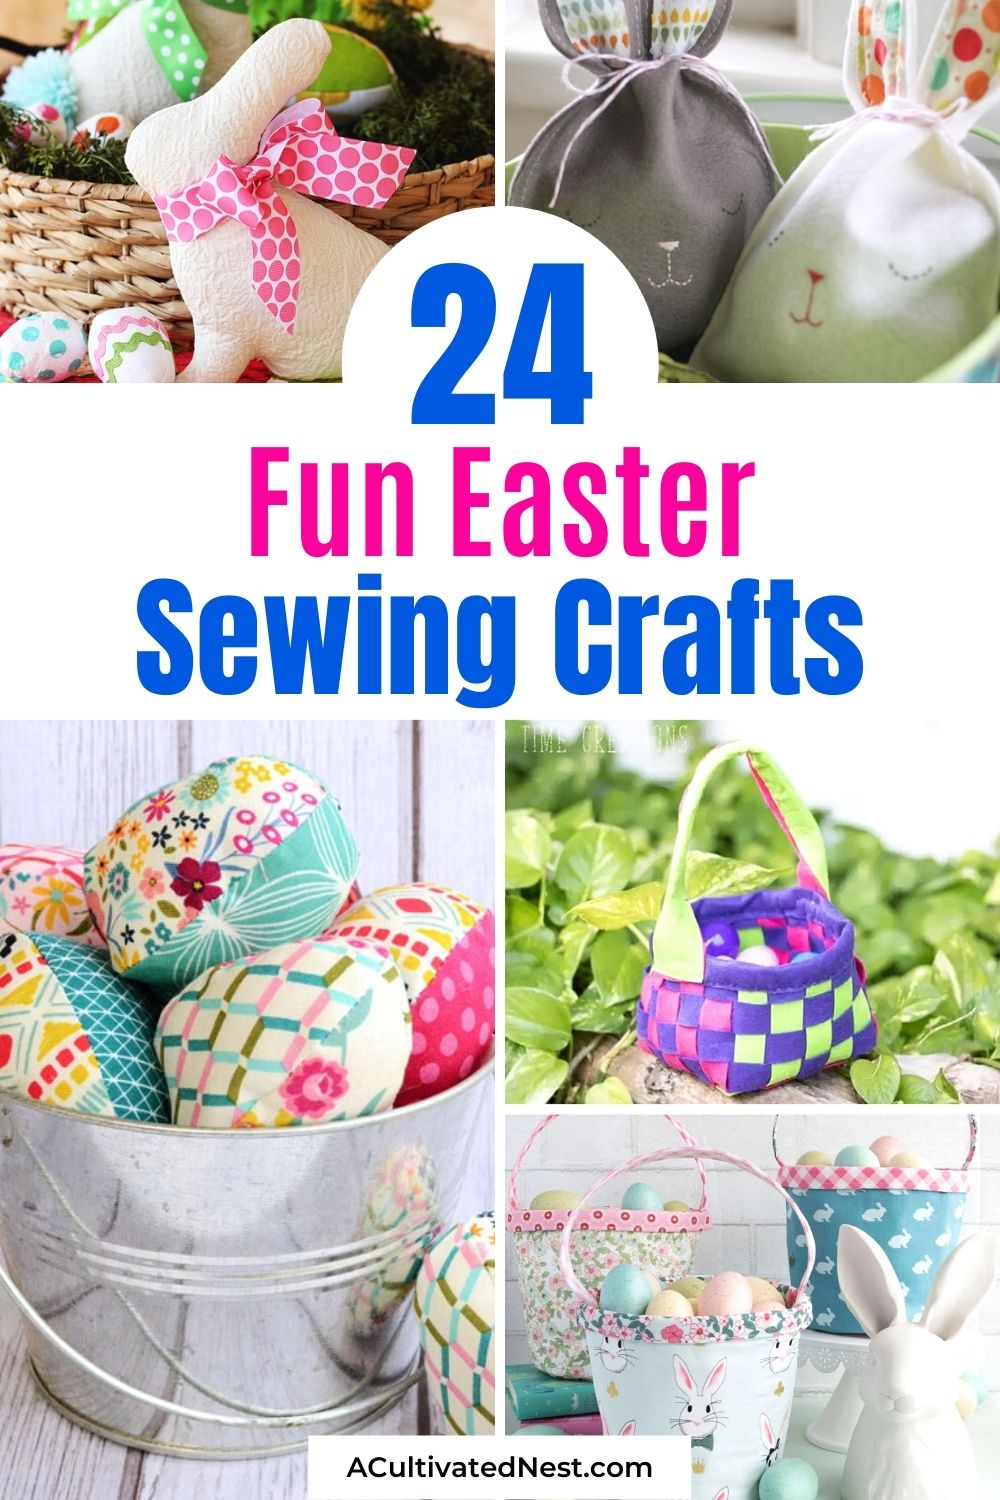 24 Fun Easter Sewing Crafts- If you want a fun springtime sewing project to do, then why not make some lovely Easter décor for your home with these fun Easter sewing crafts! | #sewingProjects #EasterDecor #EasterDIY #EasterCraft #ACultivatedNest